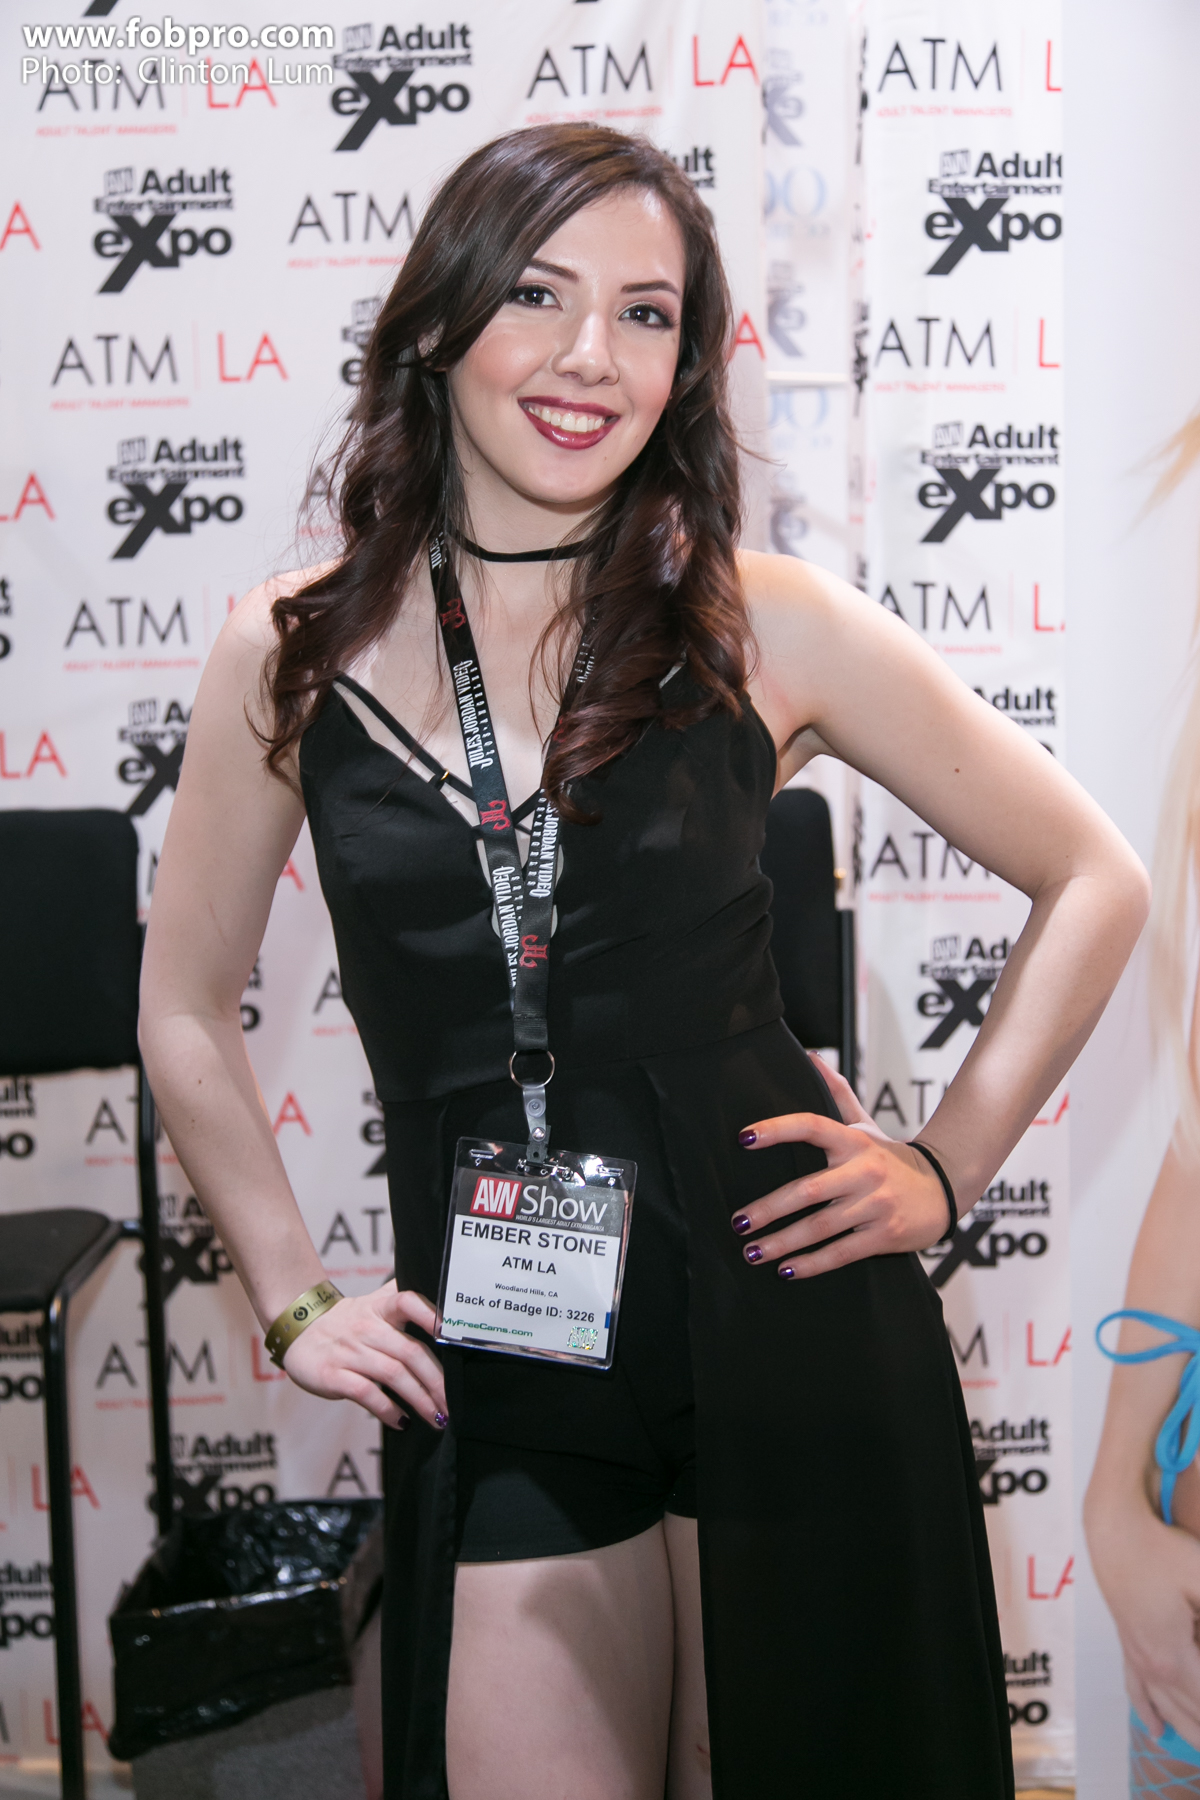 Avn Adult Entertainment Expo 2017 Day 1 Page 35 Of 38 Fob Productions